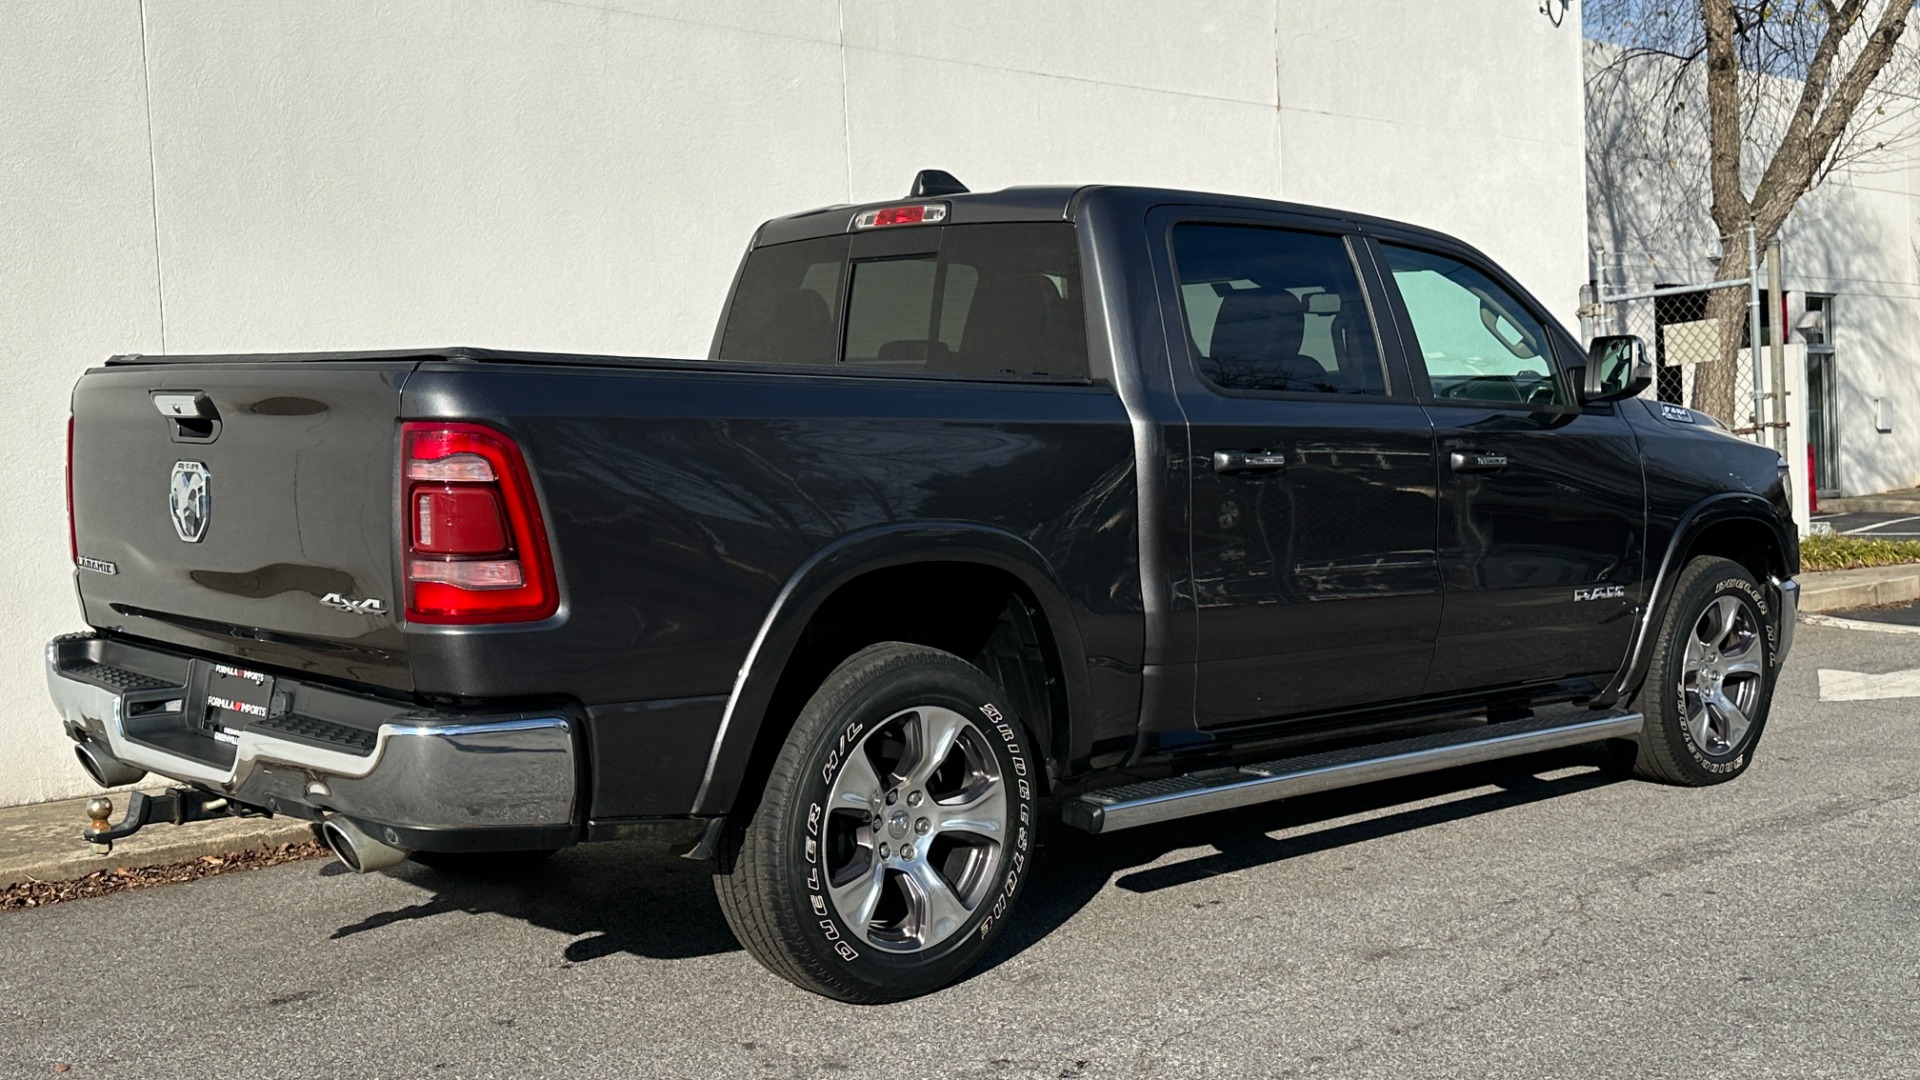 Used 2020 Ram 1500 LARAMIE / LEVEL 1 GROUP / PANORAMIC SUNROOF / 20IN WHEELS / LEATHER for sale $44,995 at Formula Imports in Charlotte NC 28227 7